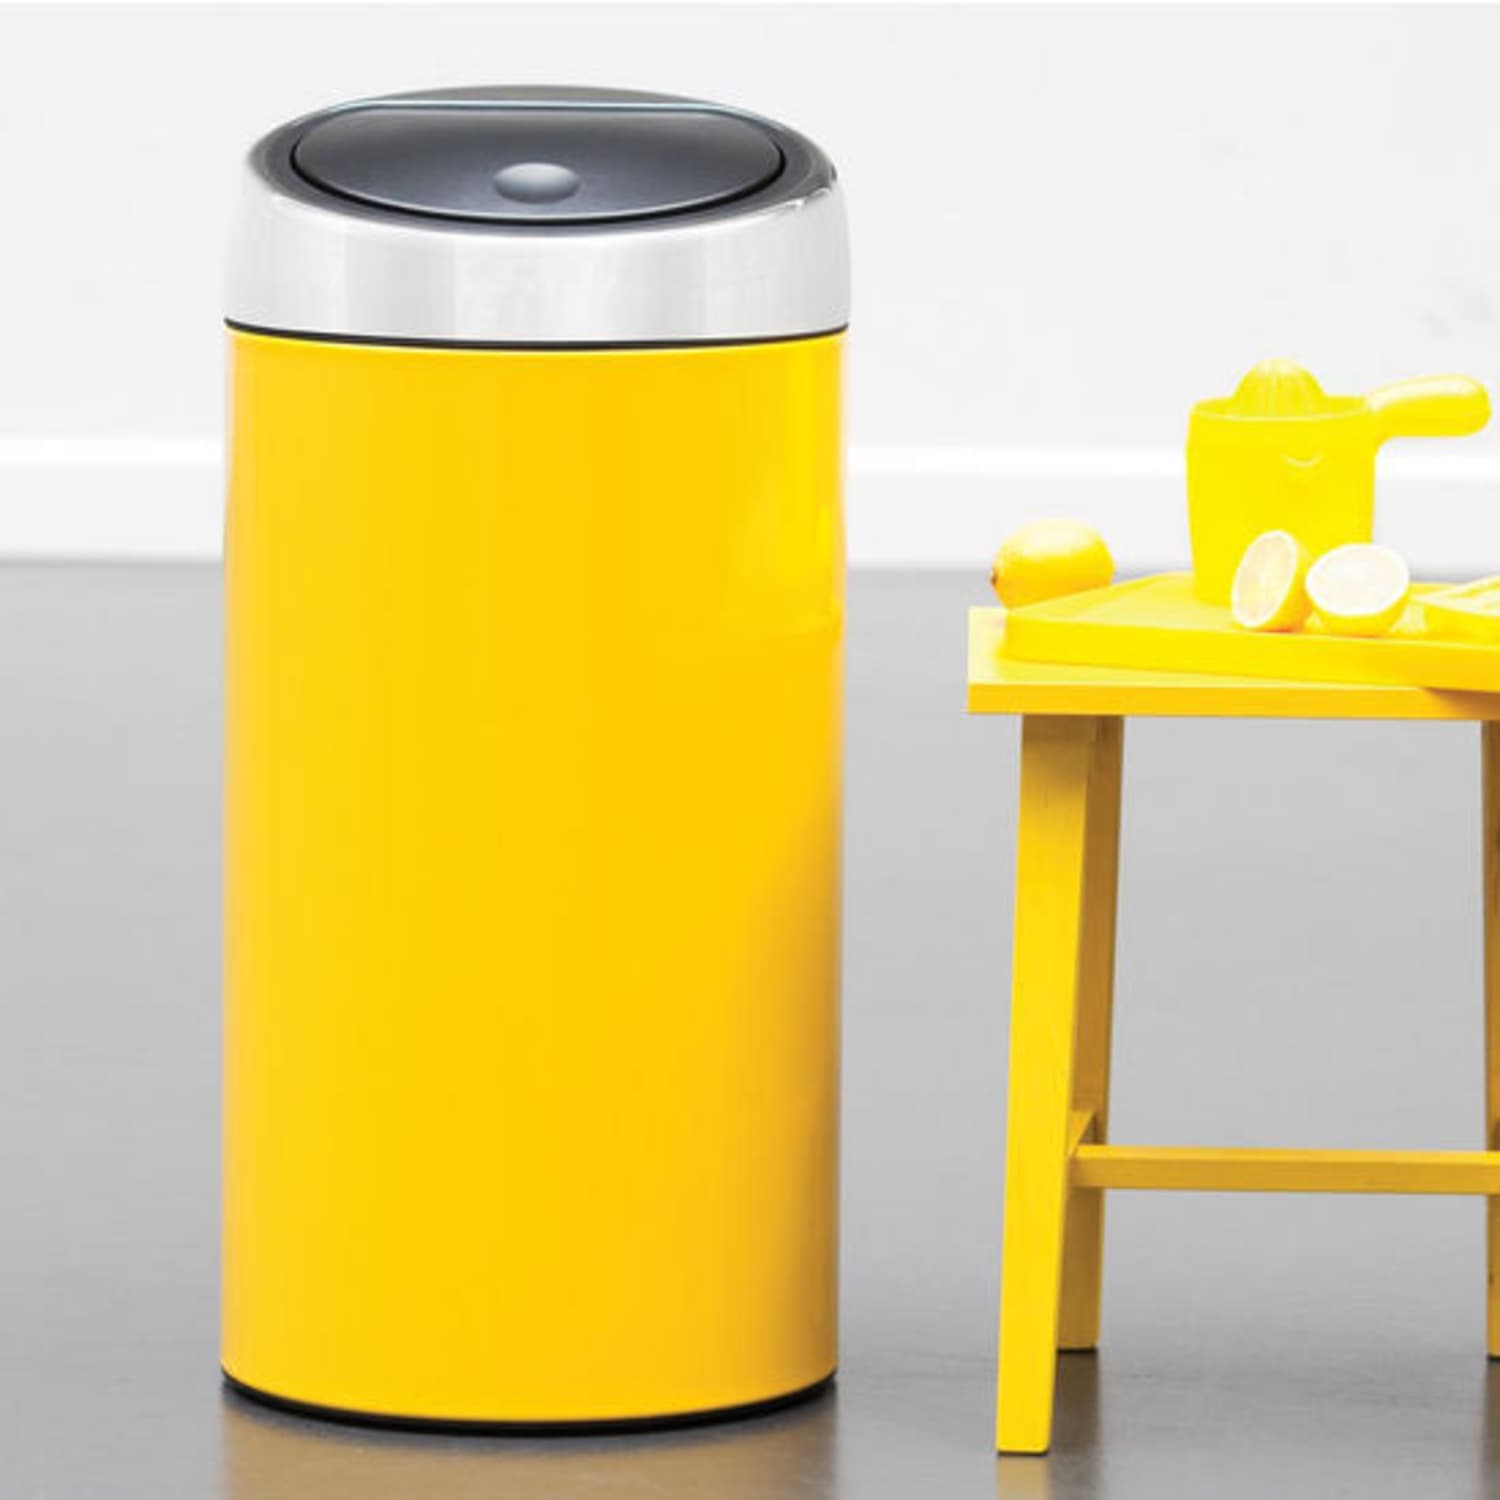 Beyond Stainless Steel: Colorful Kitchen Trash Cans from Brabantia